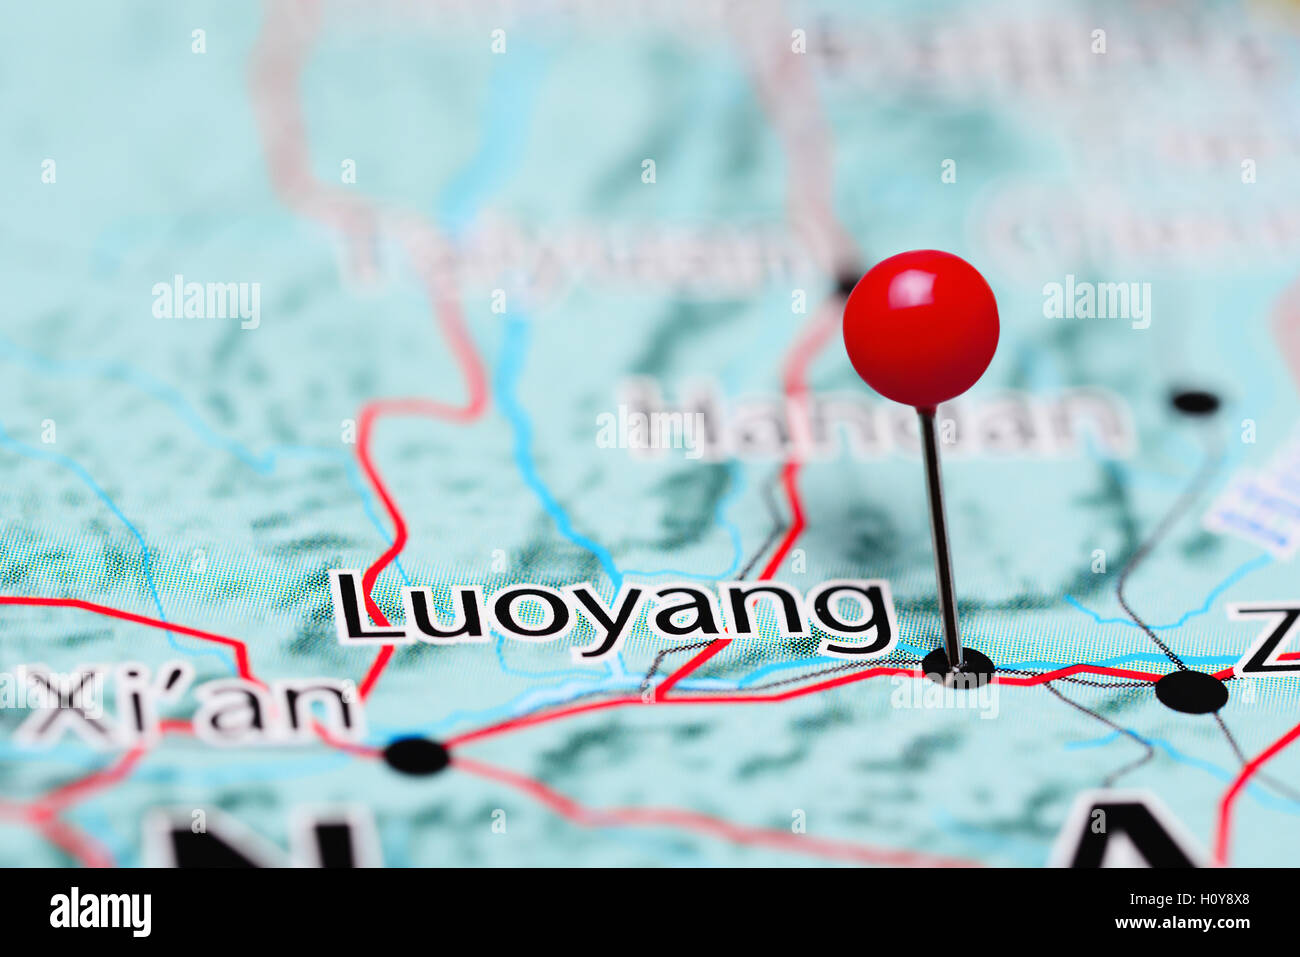 Luoyang pinned on a map of China Stock Photo